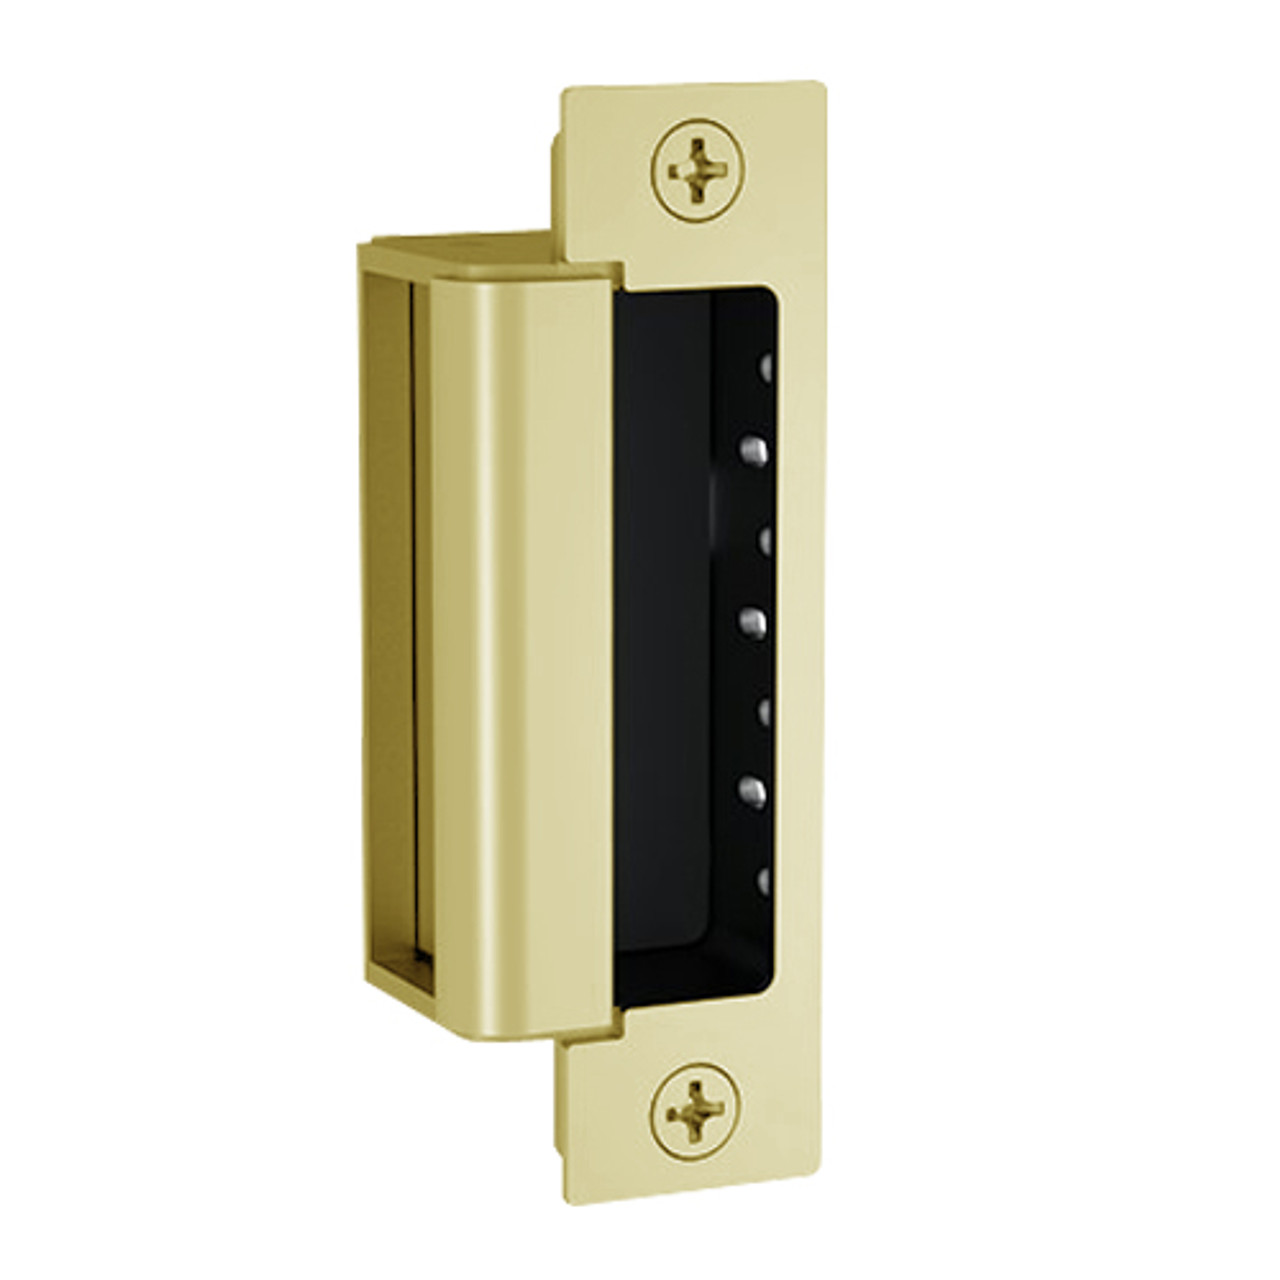 1600-CLB-DLM-606 Hes 1600 Series Dynamic Low Profile Electric Strike for Latchbolt Lock with Dual Lock Monitor in Satin Brass